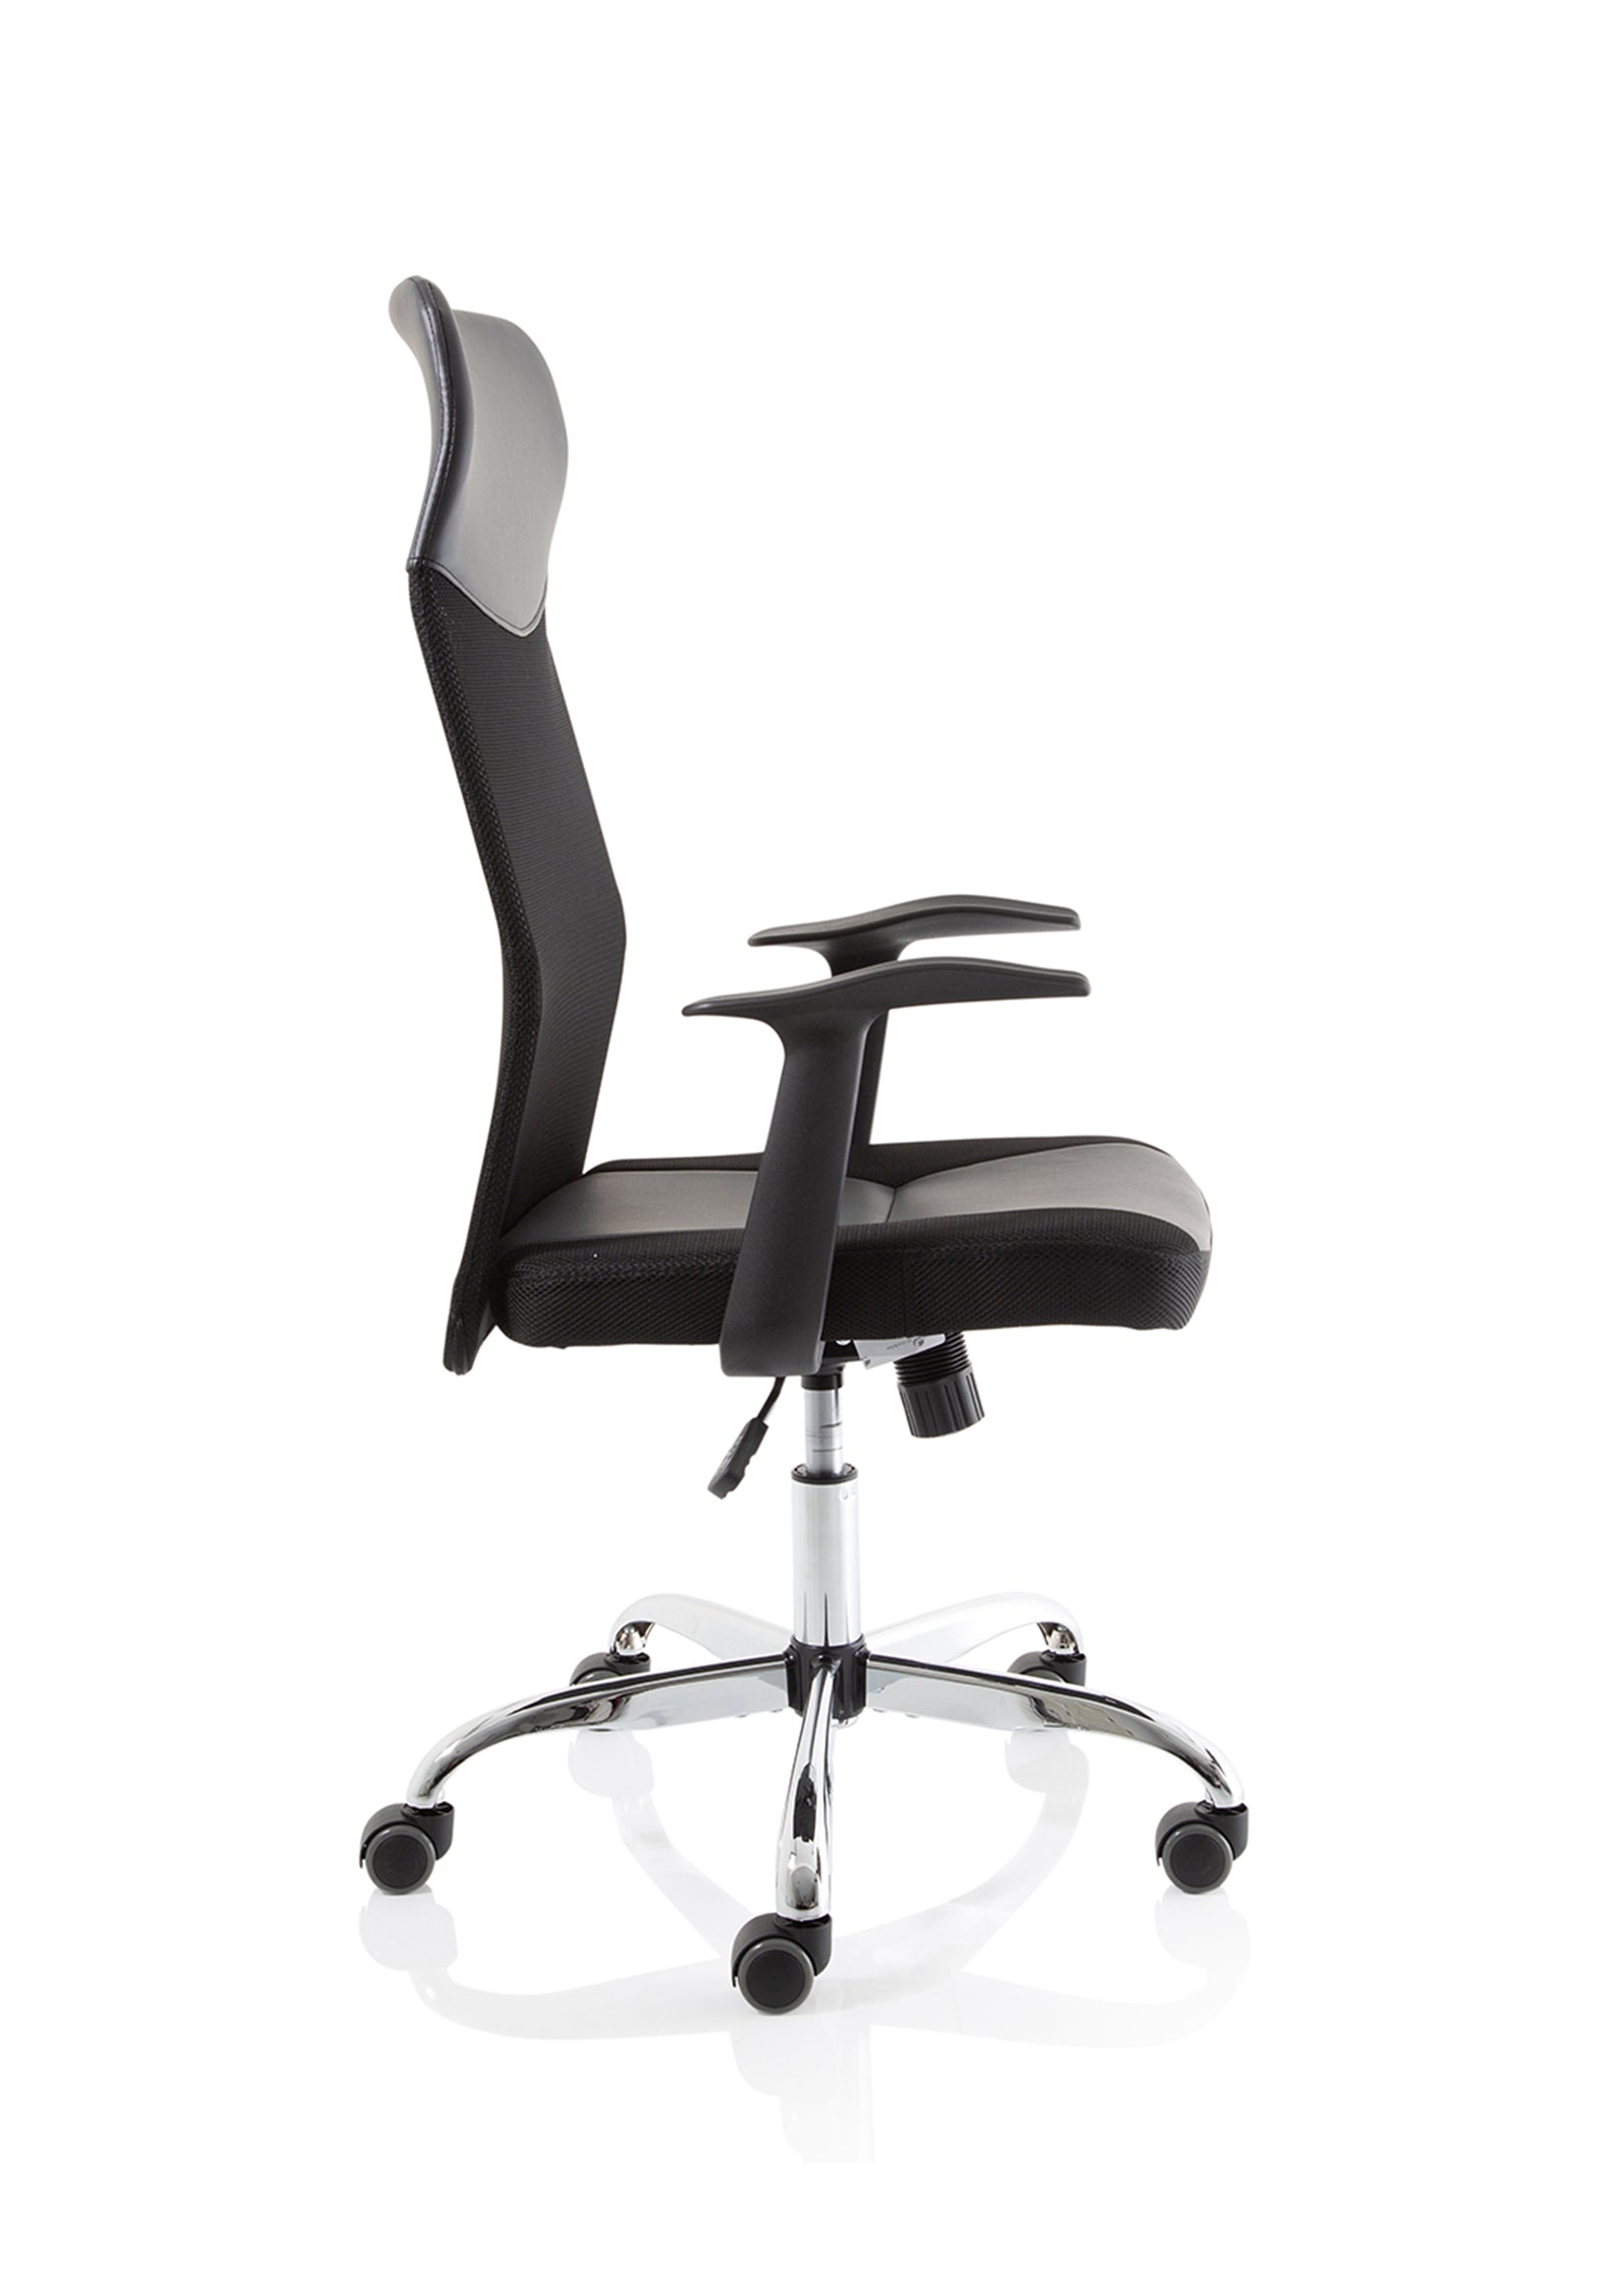 Vegalite High Mesh Back Black Executive Office Chair with Arms